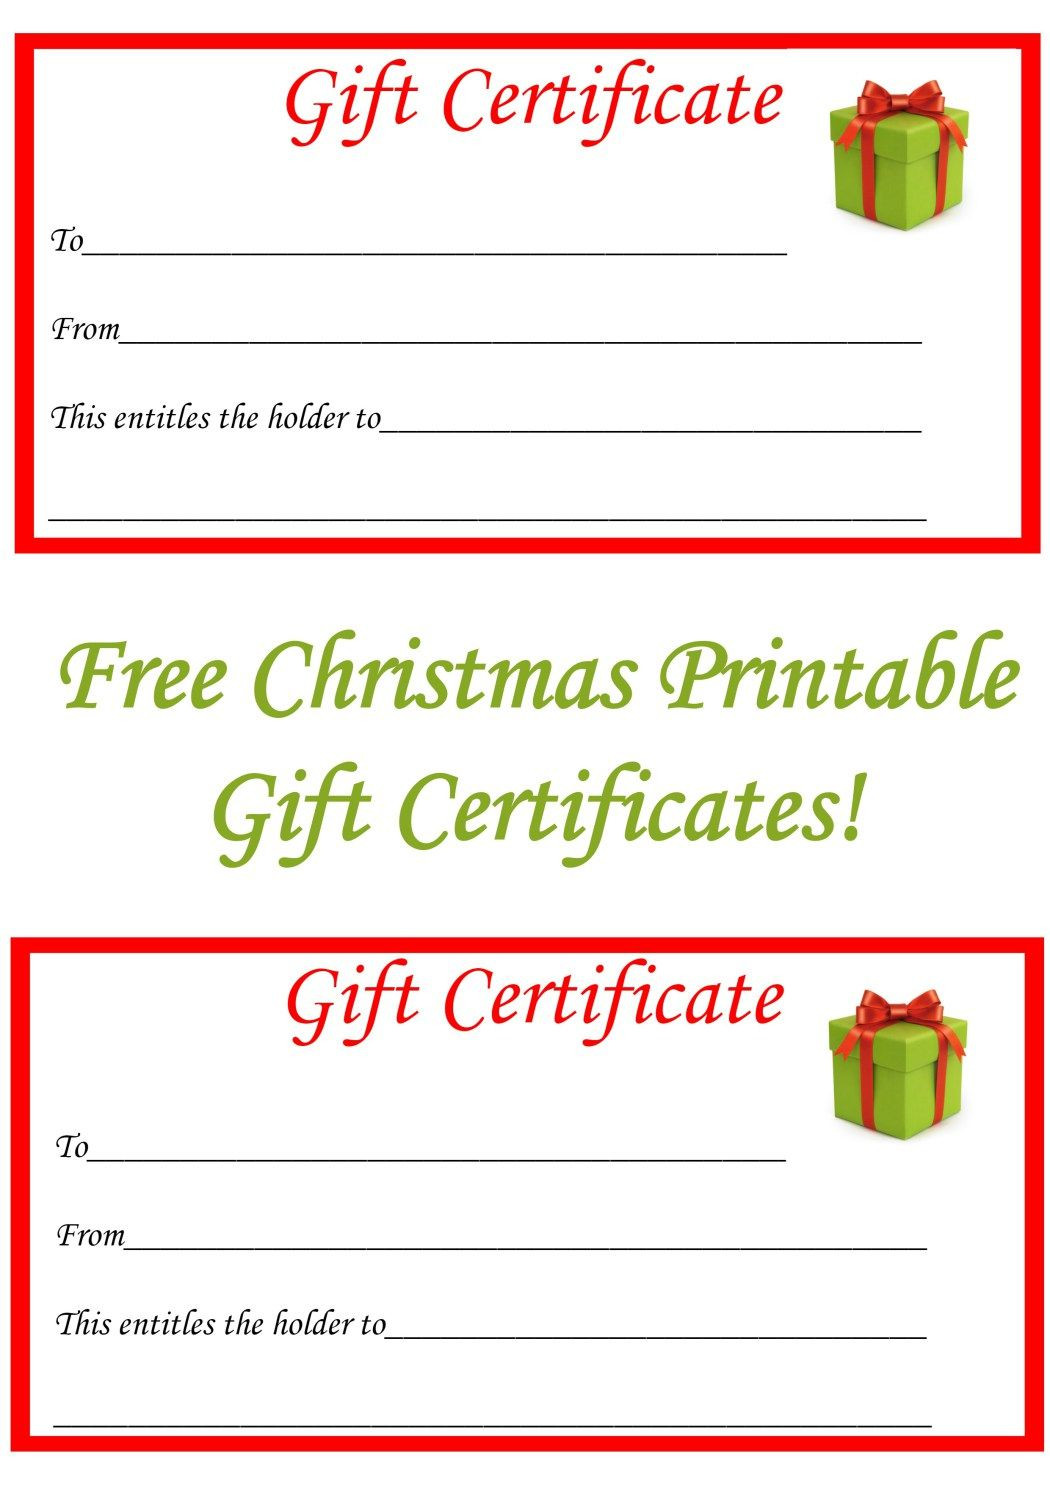 Best Gift Certificate Ideas
 The 25 best Printable t certificates ideas on